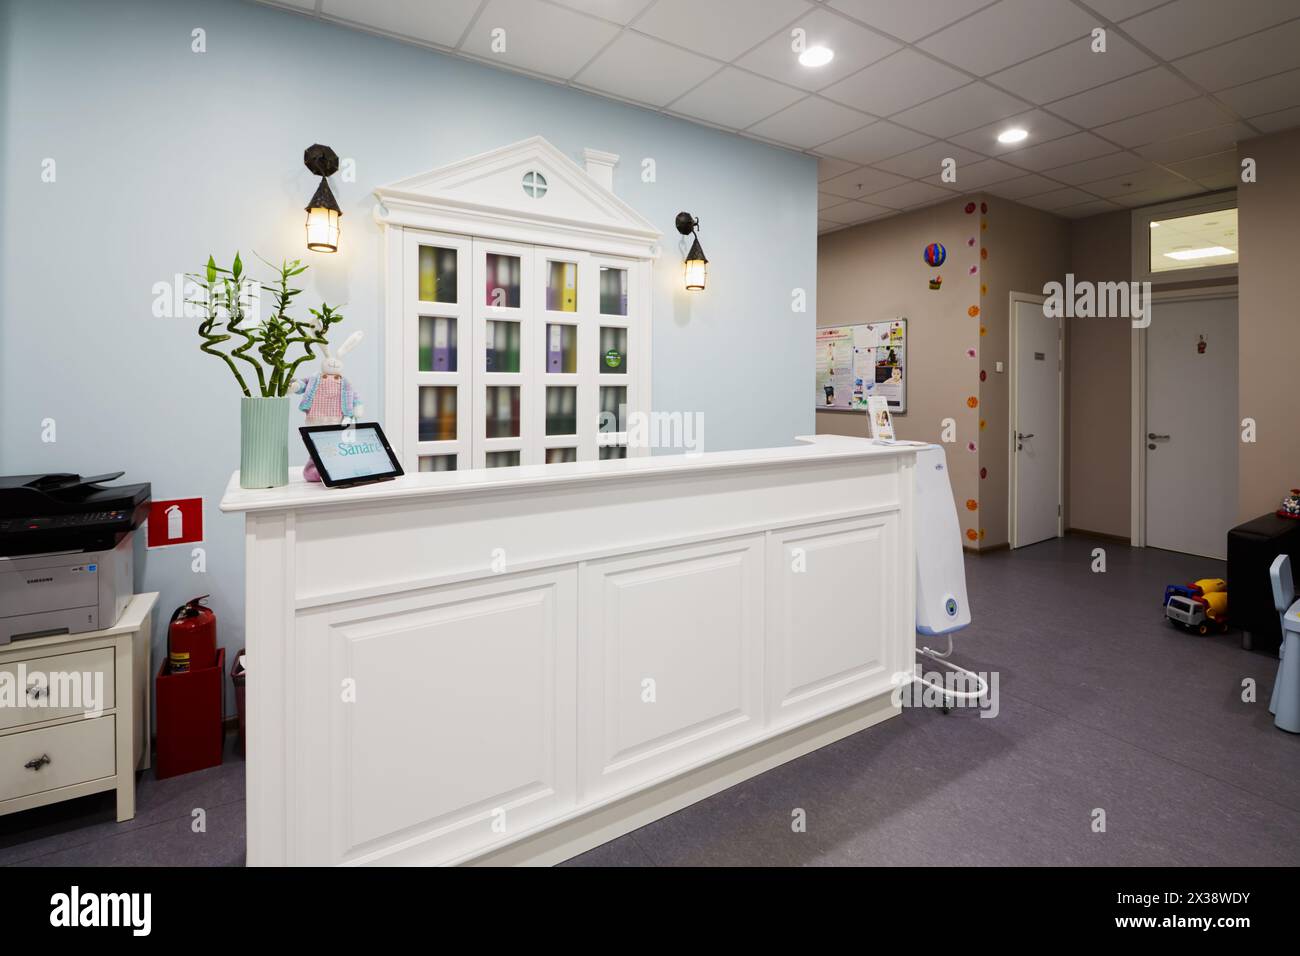 MOSCOW, RUSSIA - OCT 19, 2016: Interior of reception hall in Children Medical Center Sanare for children of all ages from birth to 17 years old. Stock Photo